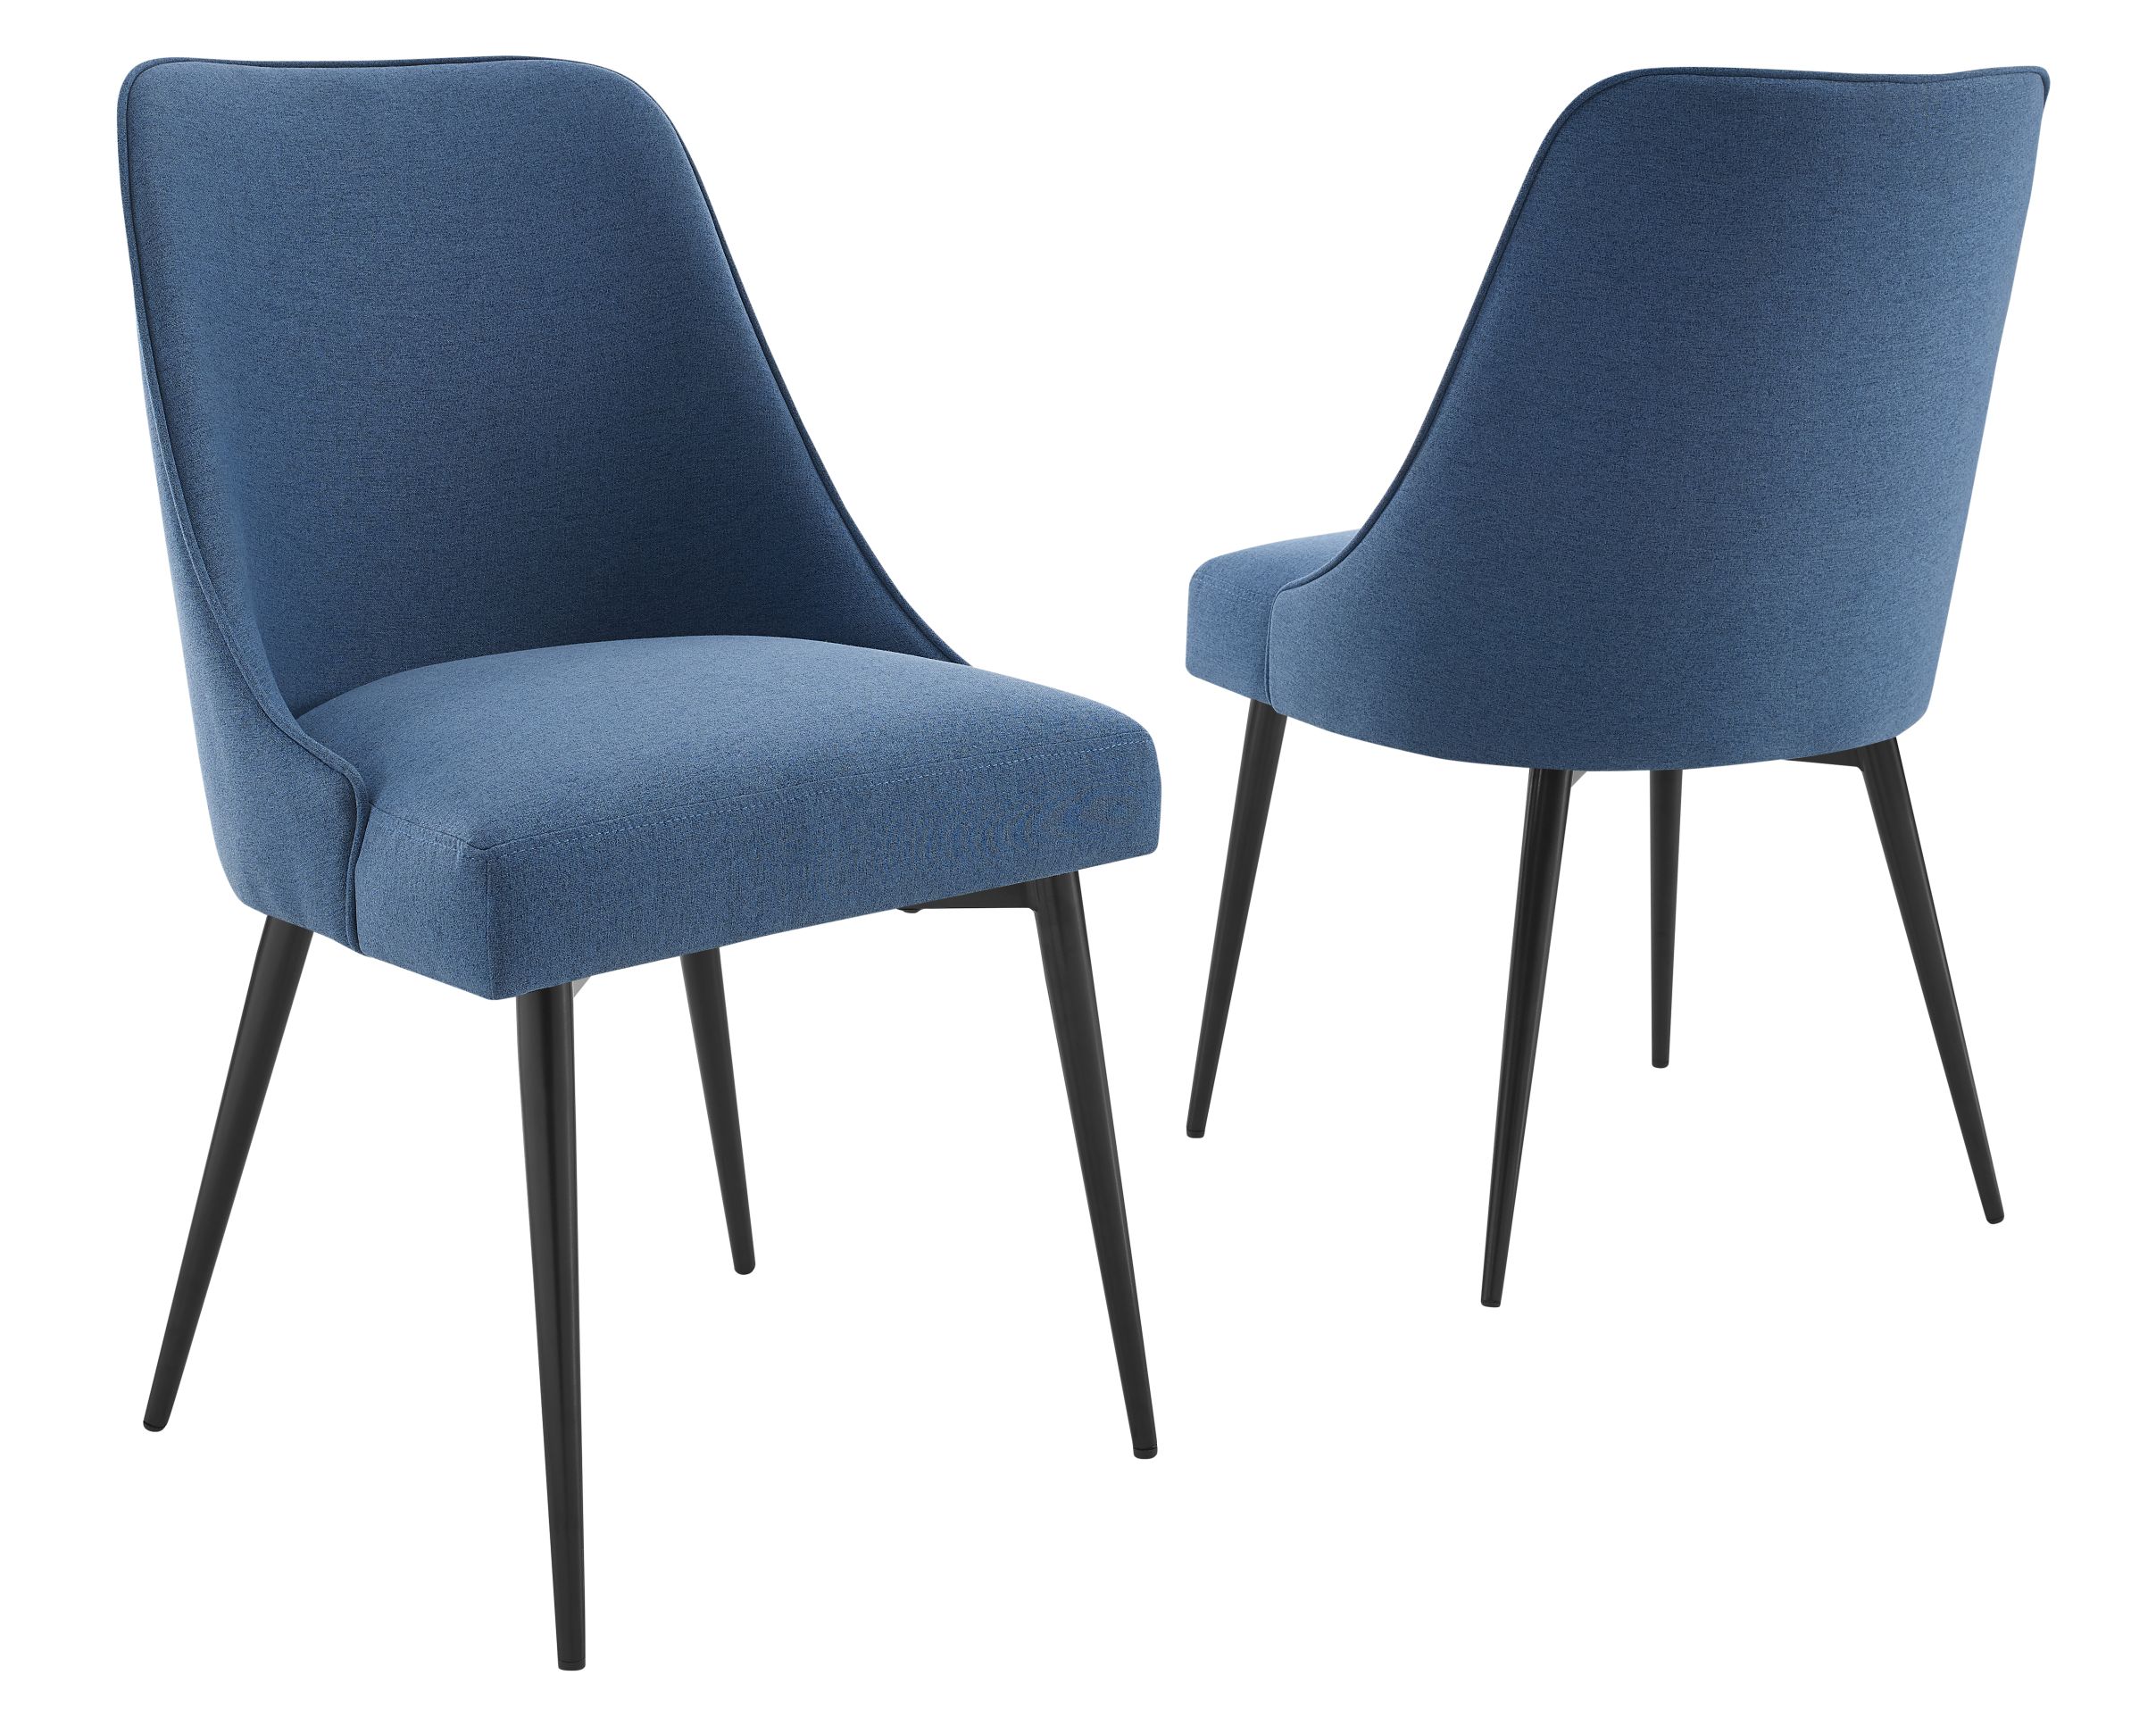 Colfax Side Chair Blue - set of 2